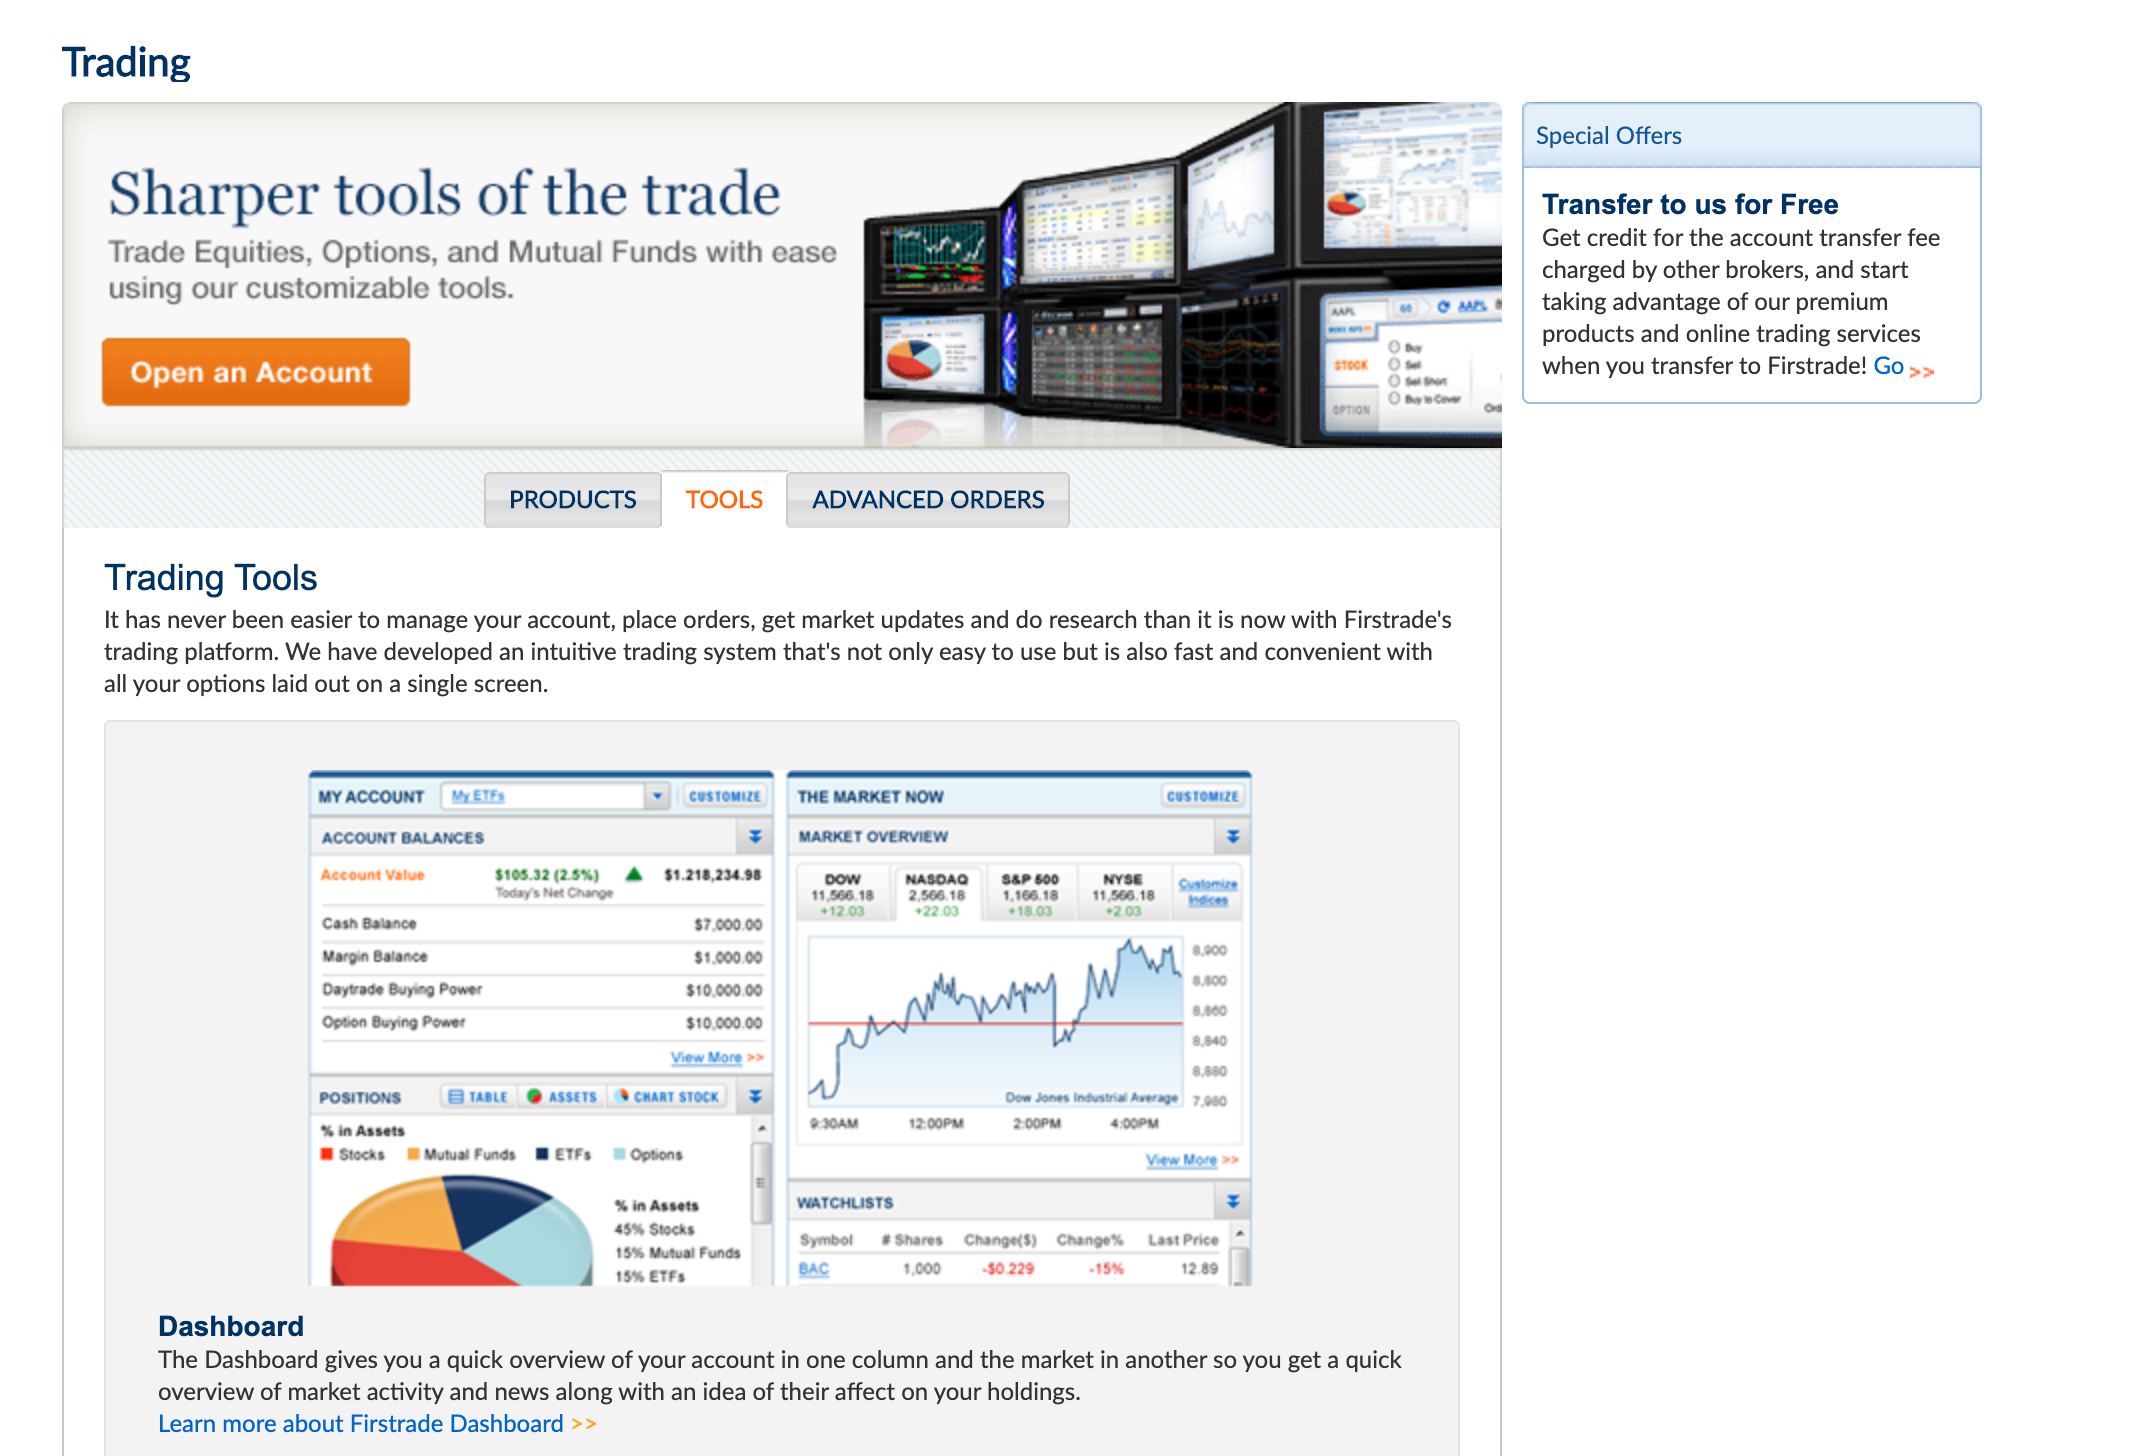 Firstrade trading tools